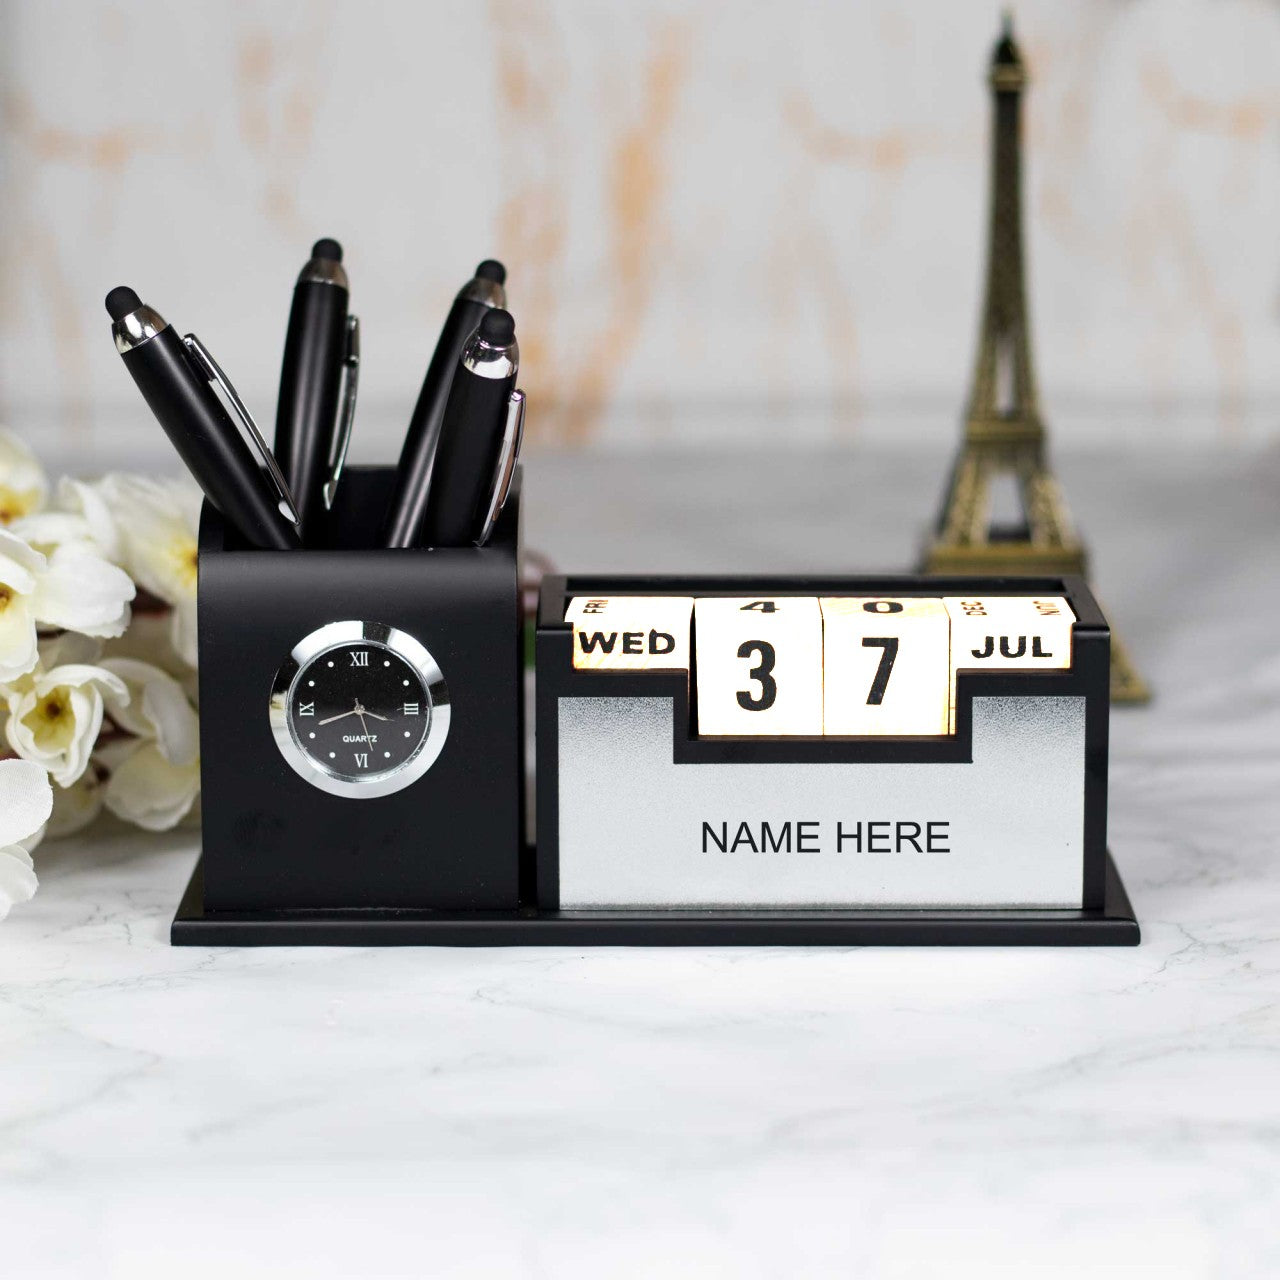 Personalized Table Stand With Calendar & Clock